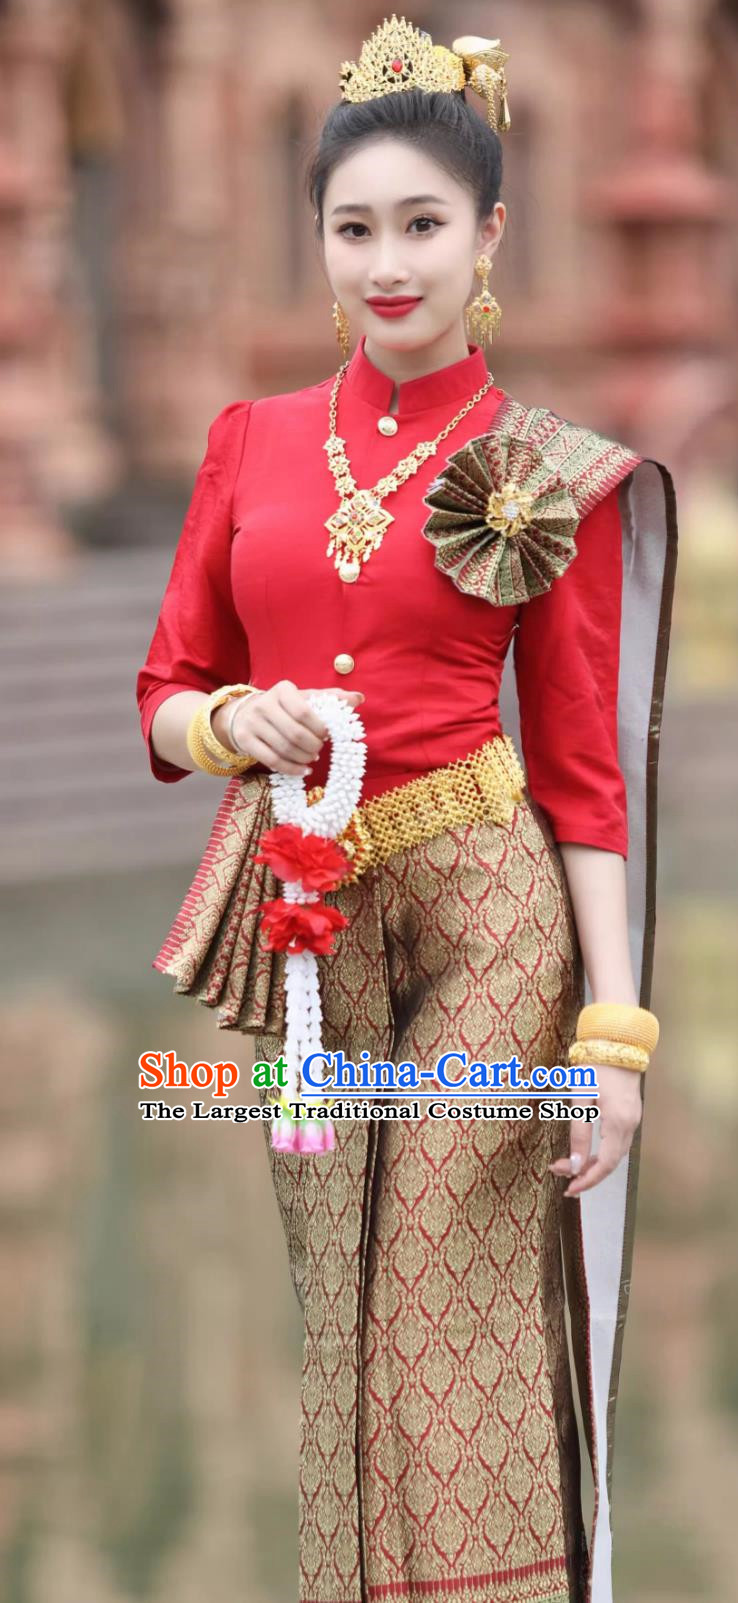 Thai Women Clothing Host Bride Dress Welcome Work Dress Thailand Traditional Costume